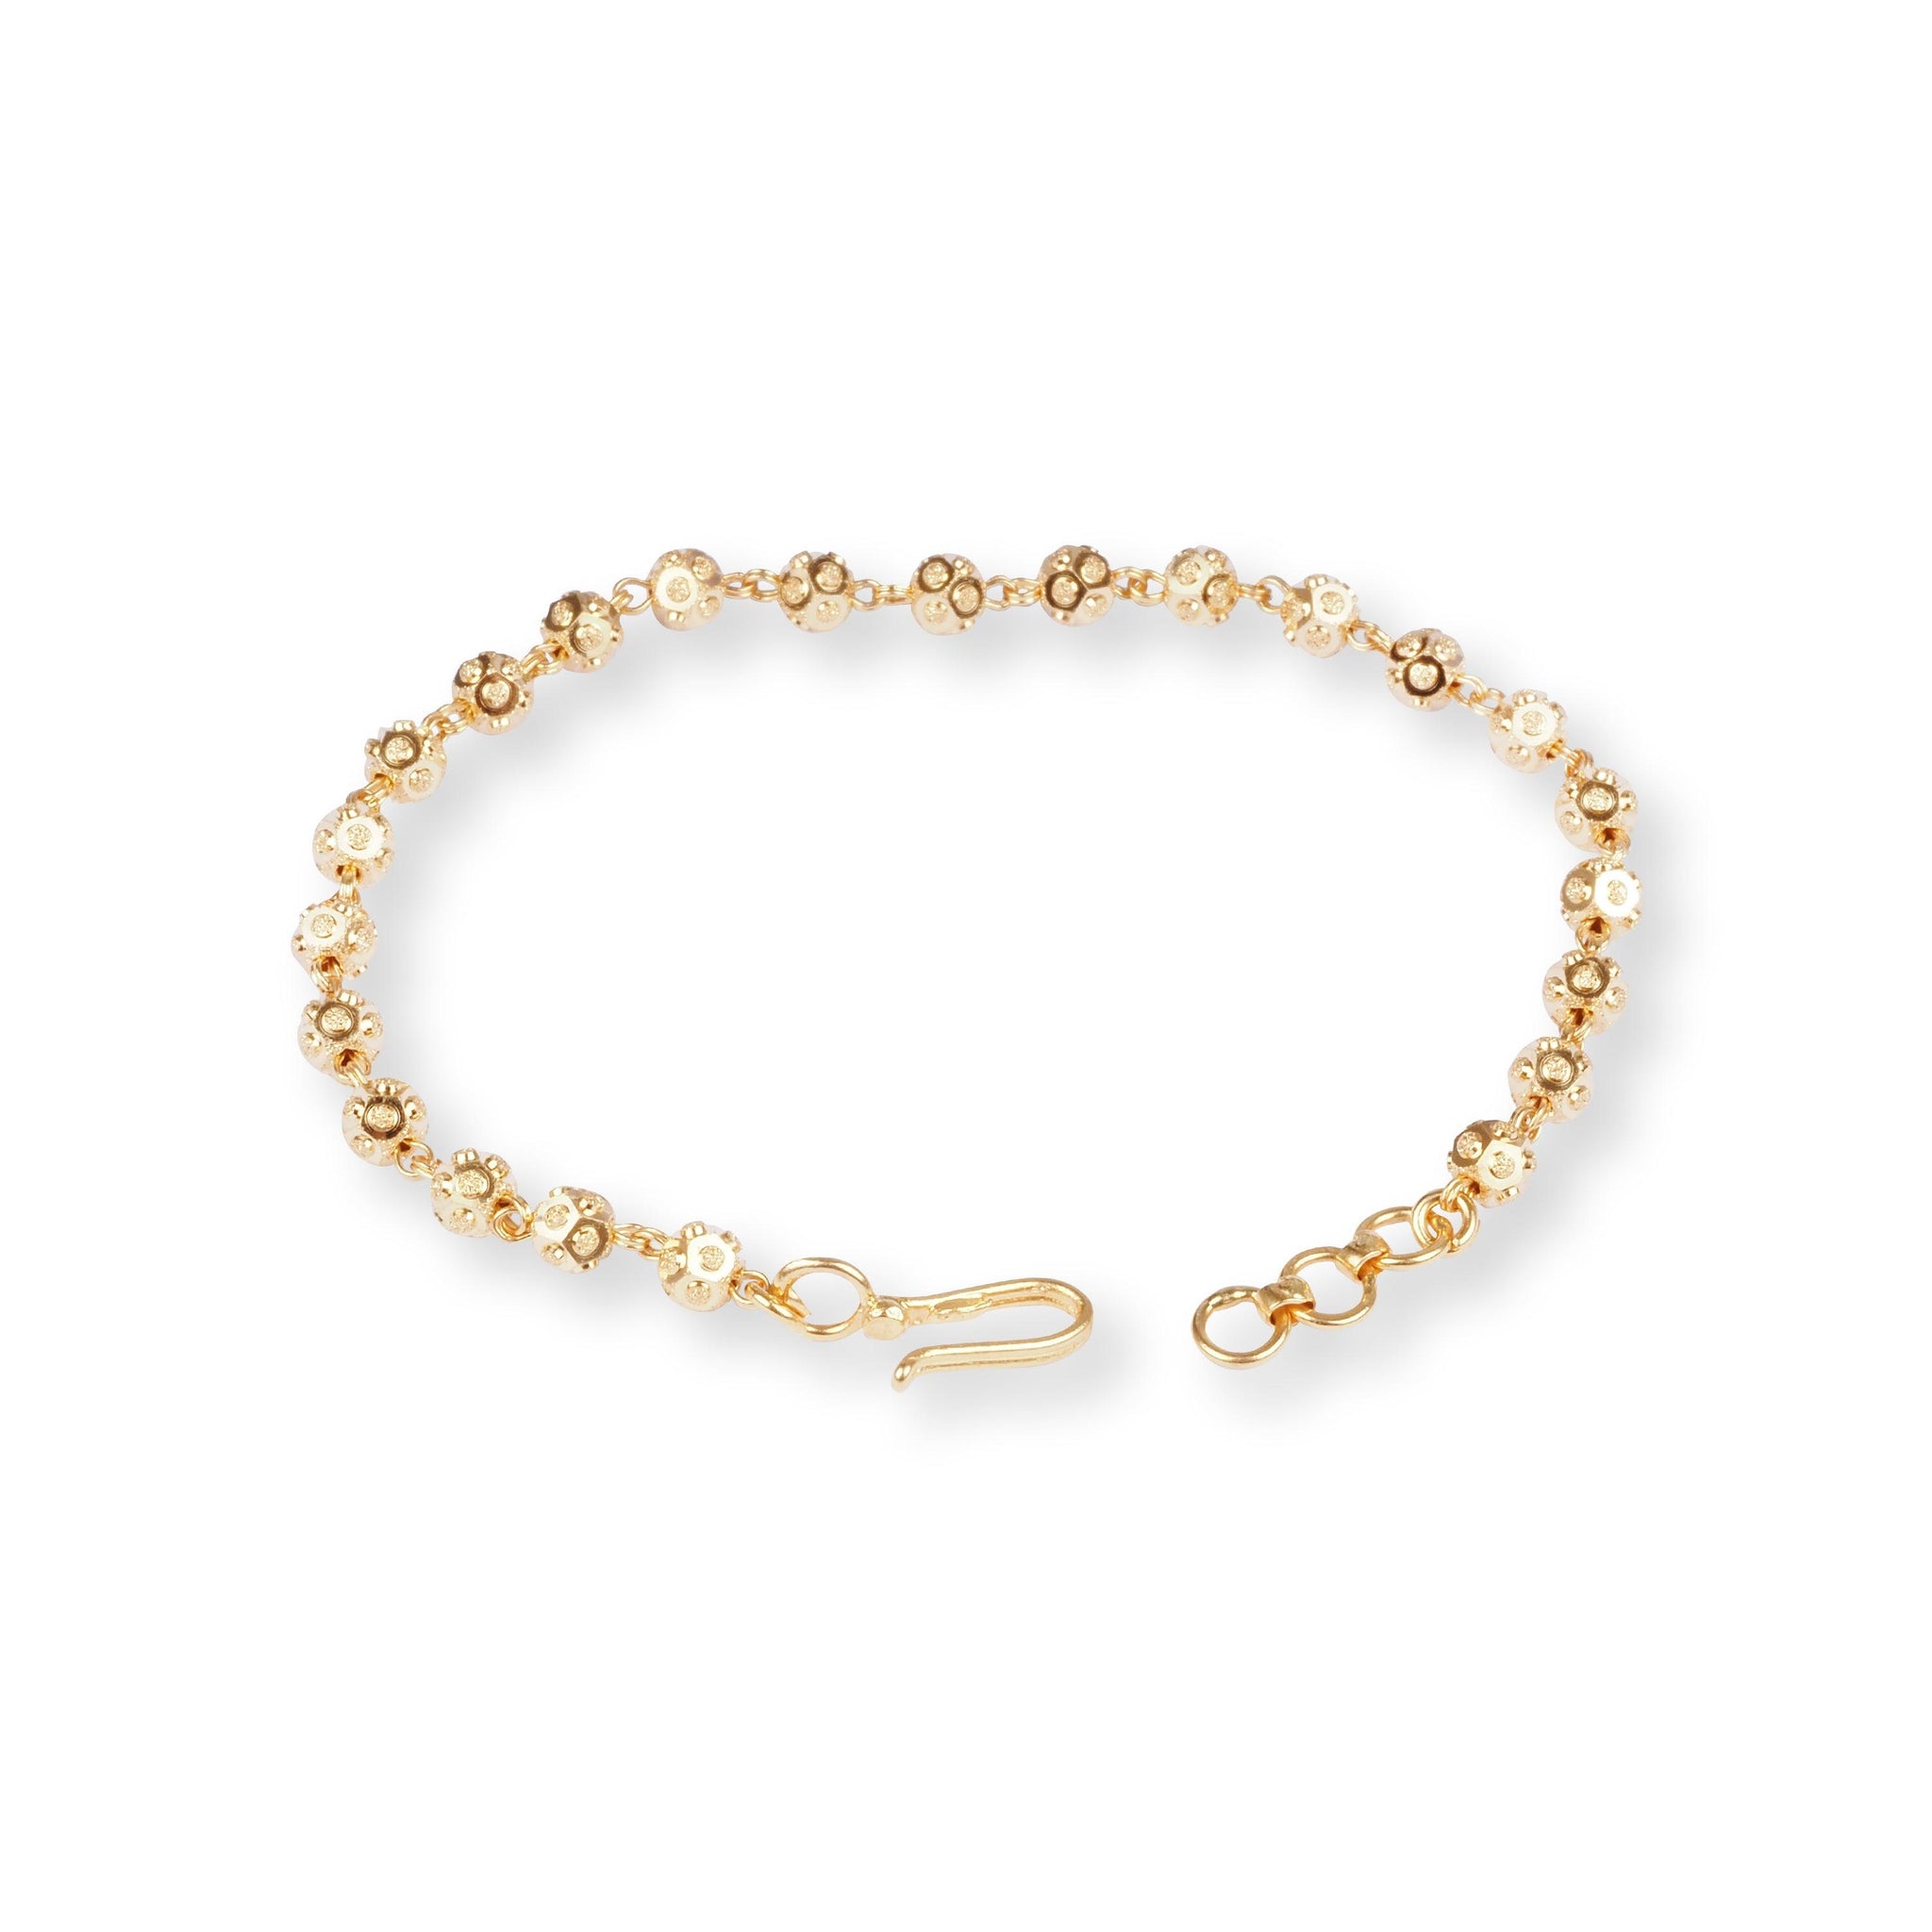 22ct Gold Bracelet with Diamond Cut Beads and Hook Clasp LBR-8499